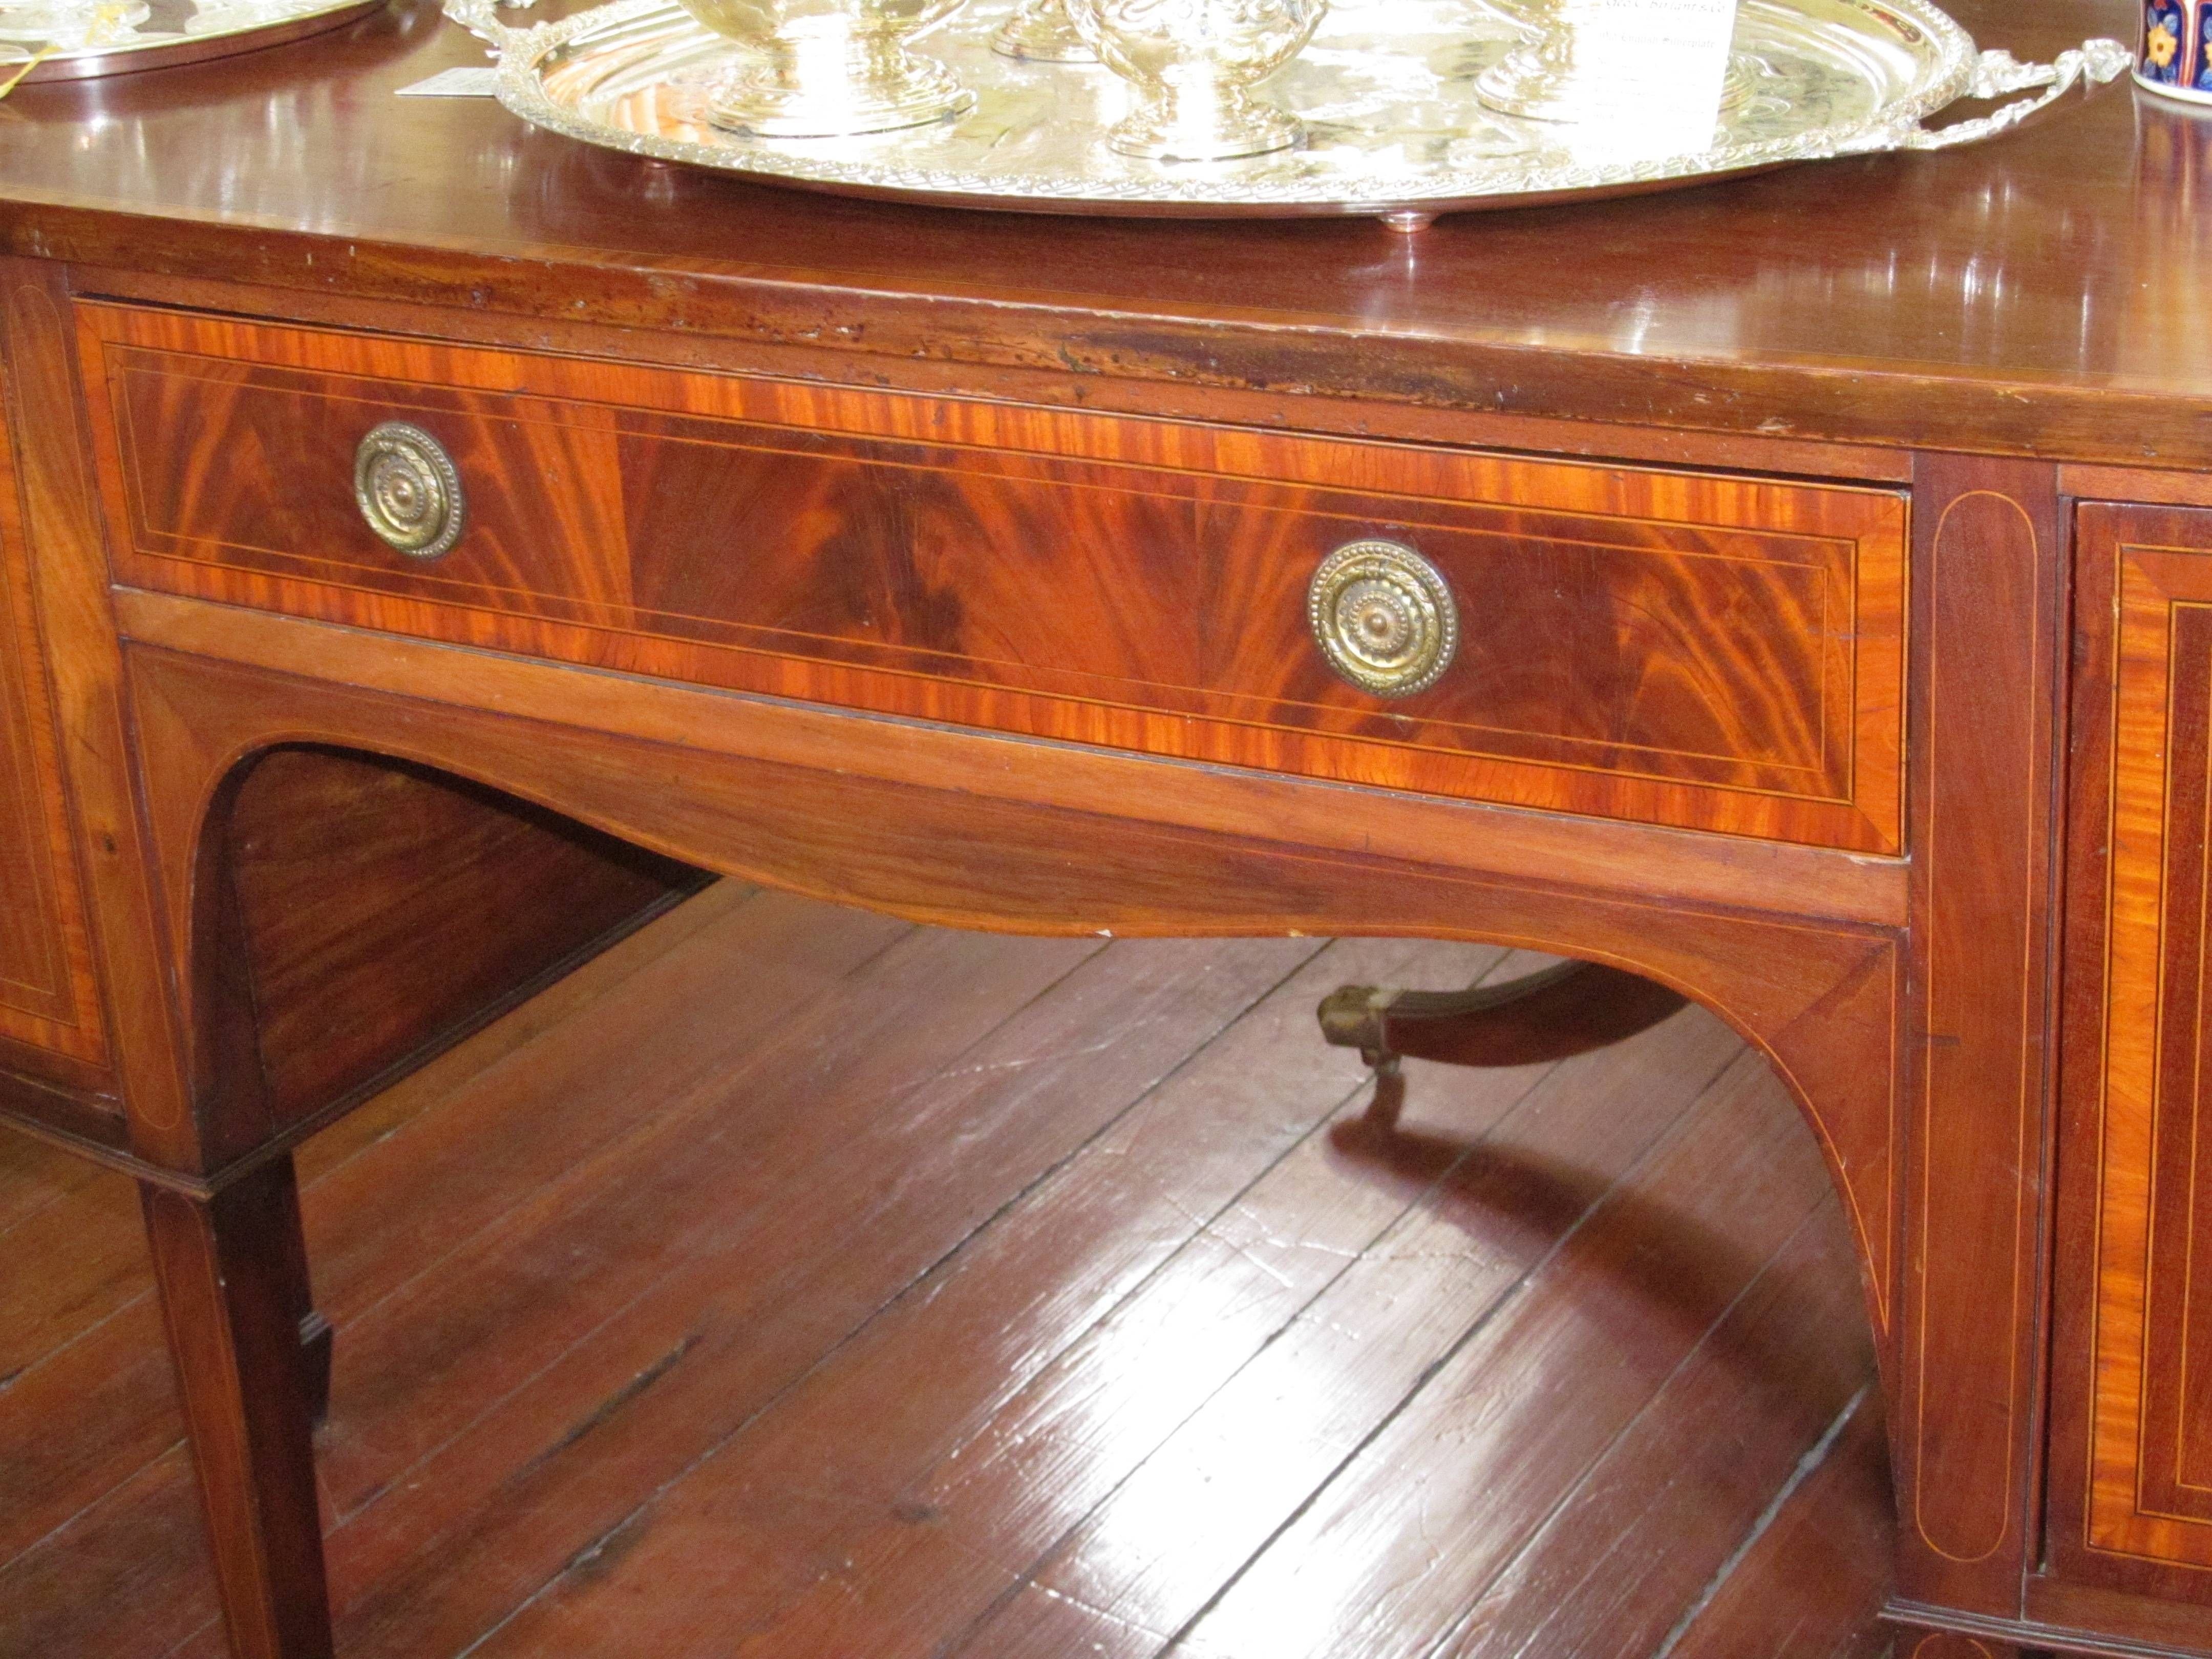 Antique English Inlaid Flame Mahogany Hepplewhite Style Bowfront Pertaining To Hepplewhite Sideboards (View 12 of 15)